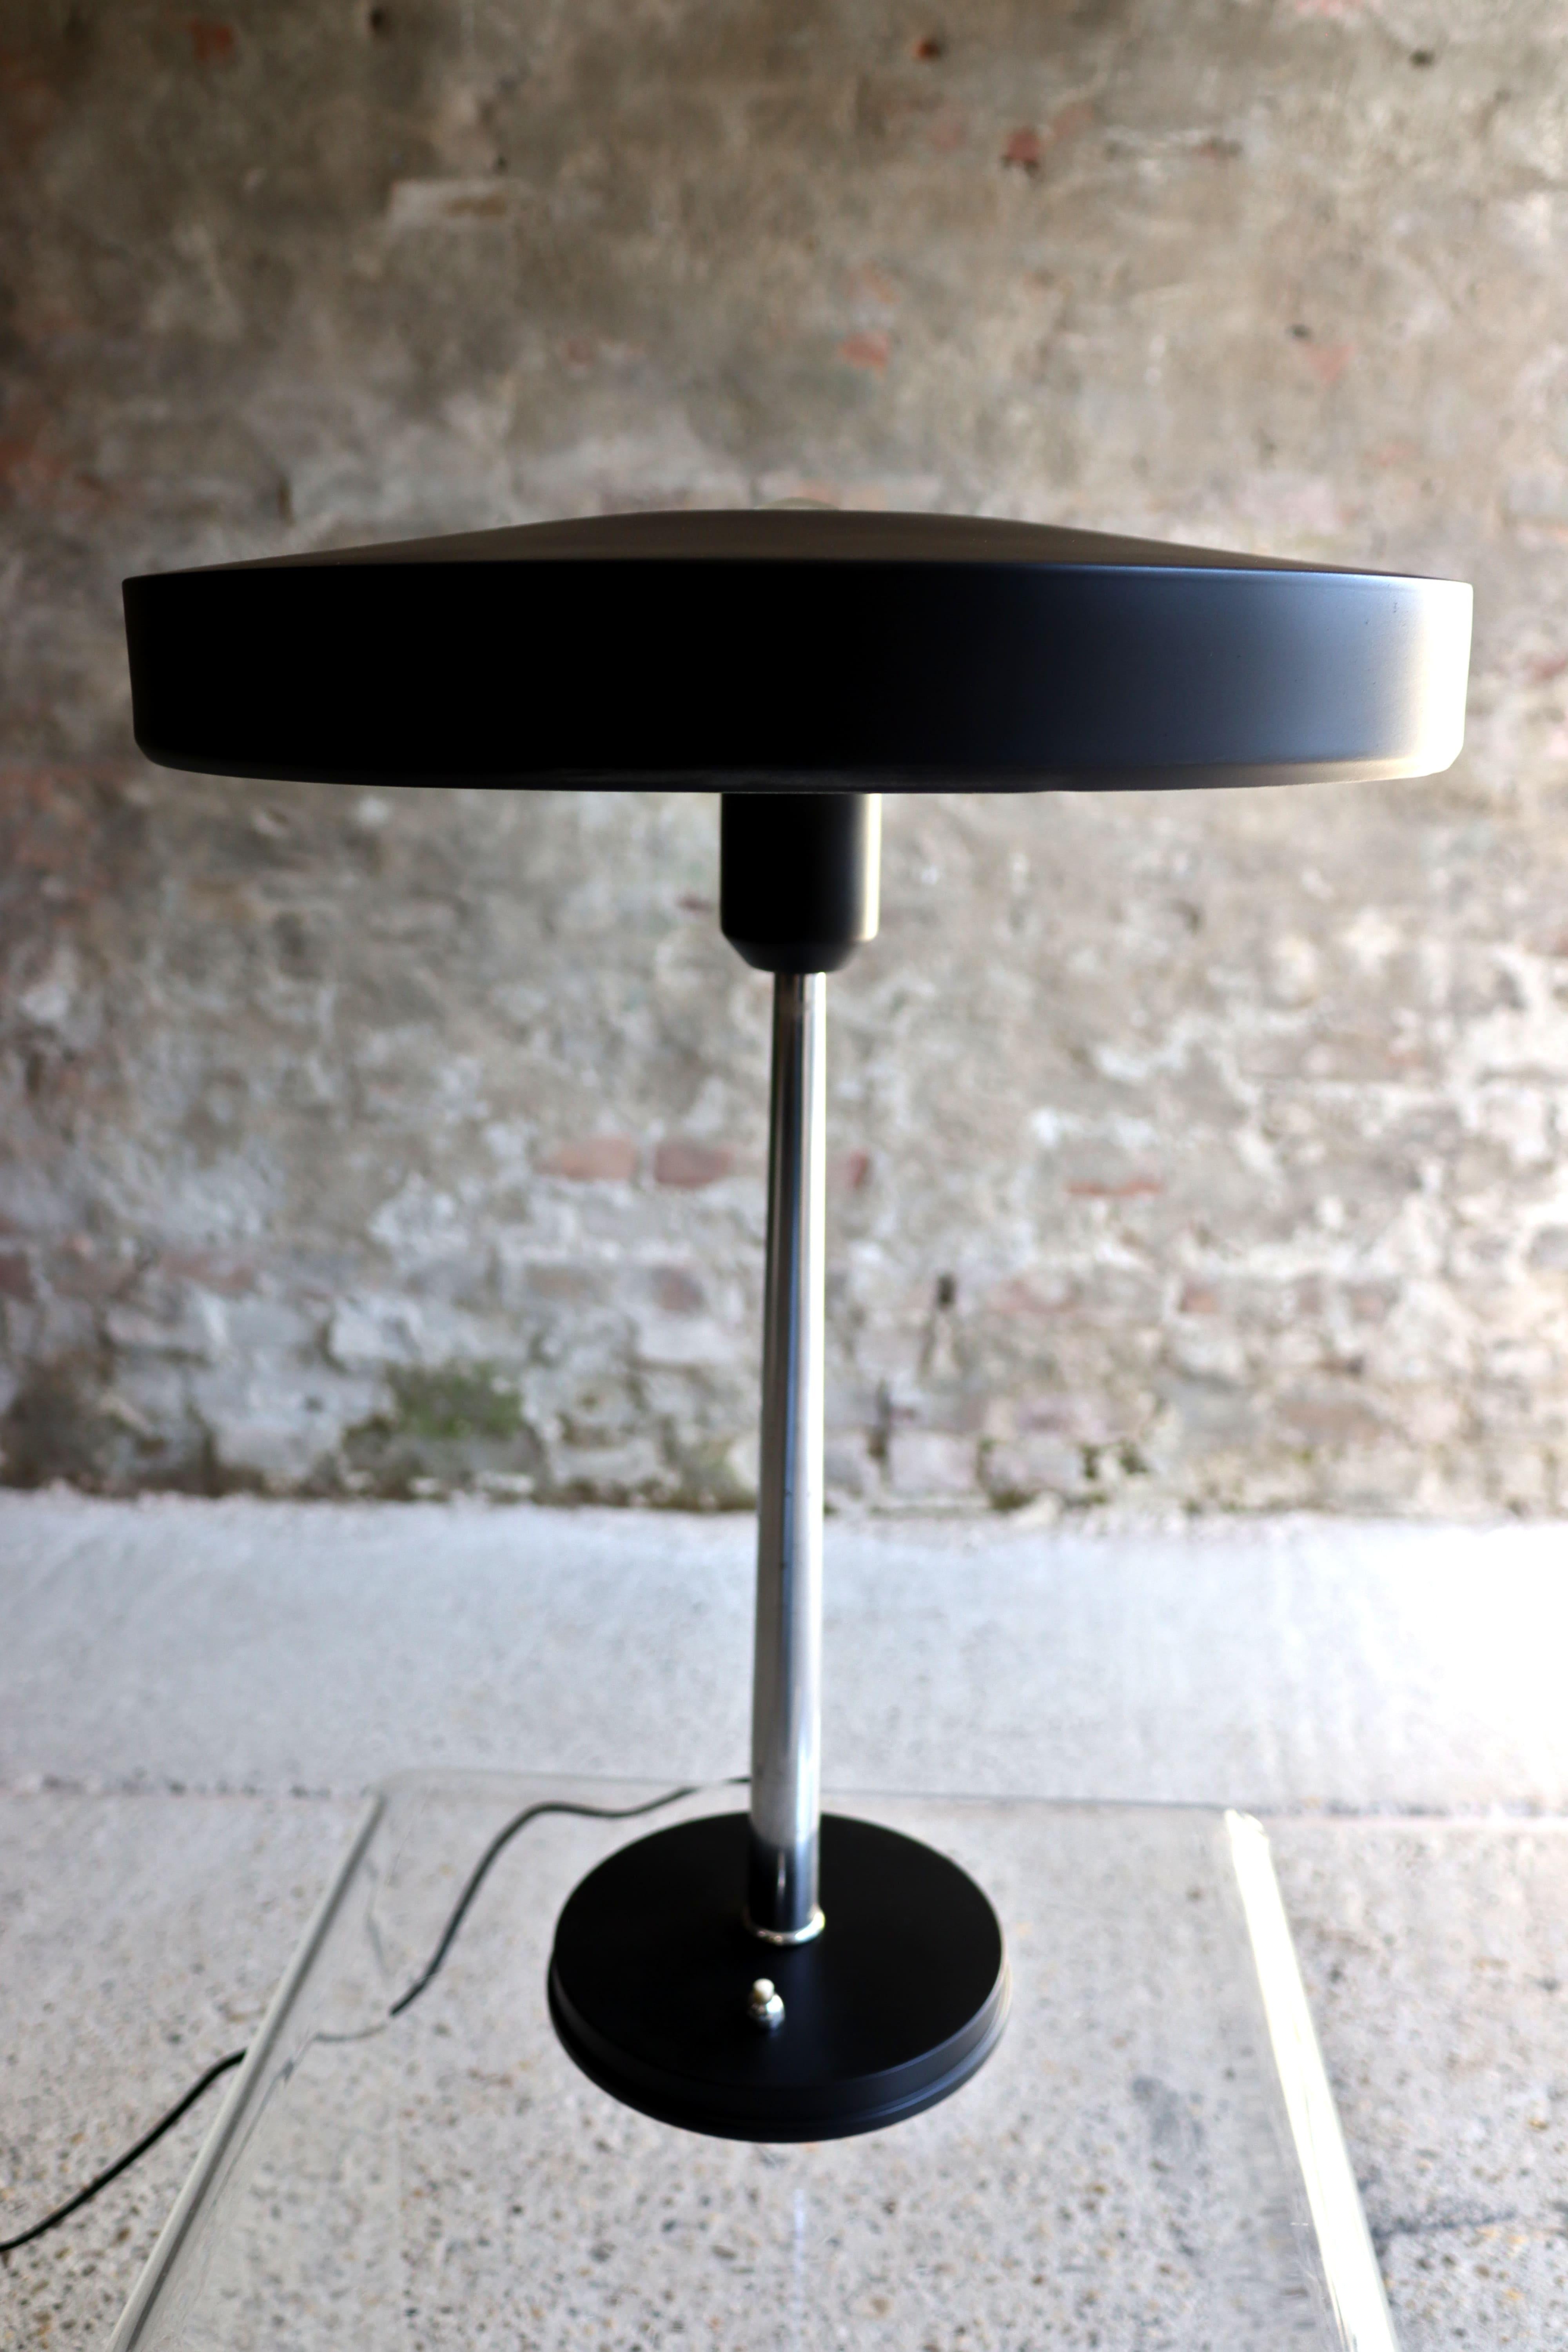 This lamp is officially called Major, but some people know it as Timur. This lamp is designed by Louis Kalff for Philips in the 1960s. The base and shade are made of black lacquered metal and the silver shaft, a characteristic detail of the lighting